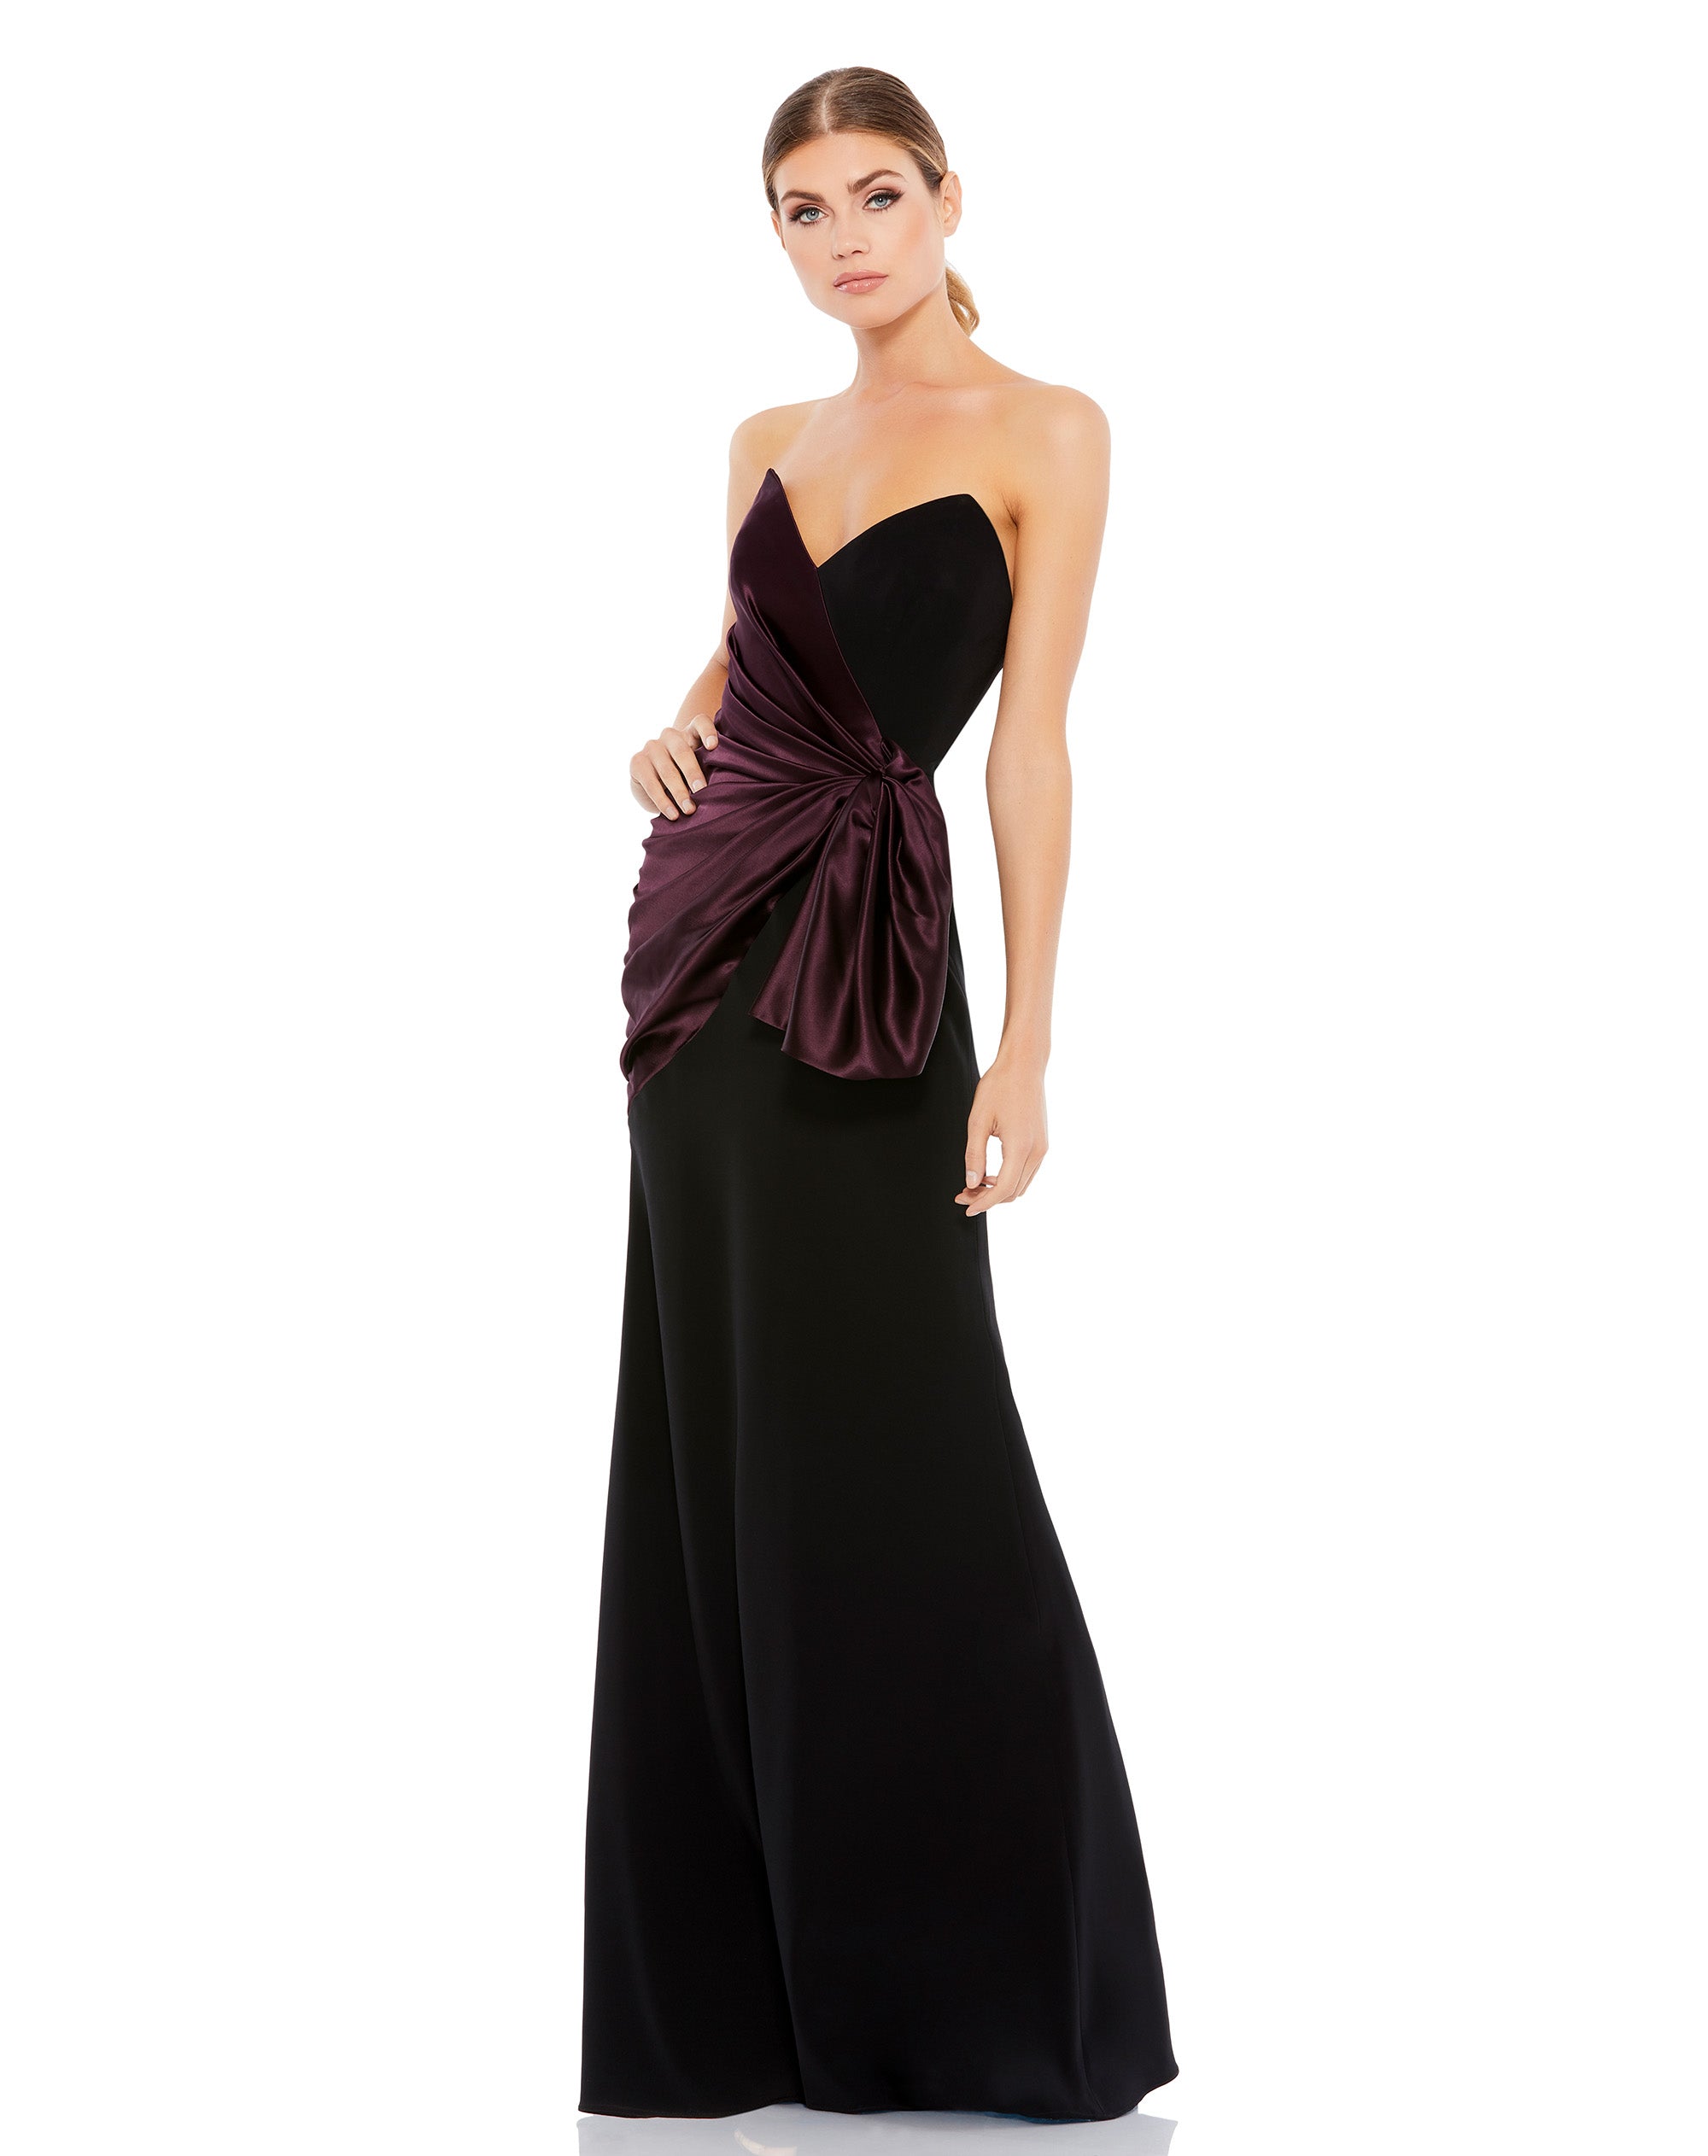 Long sweetheart neckline gown with satin bow